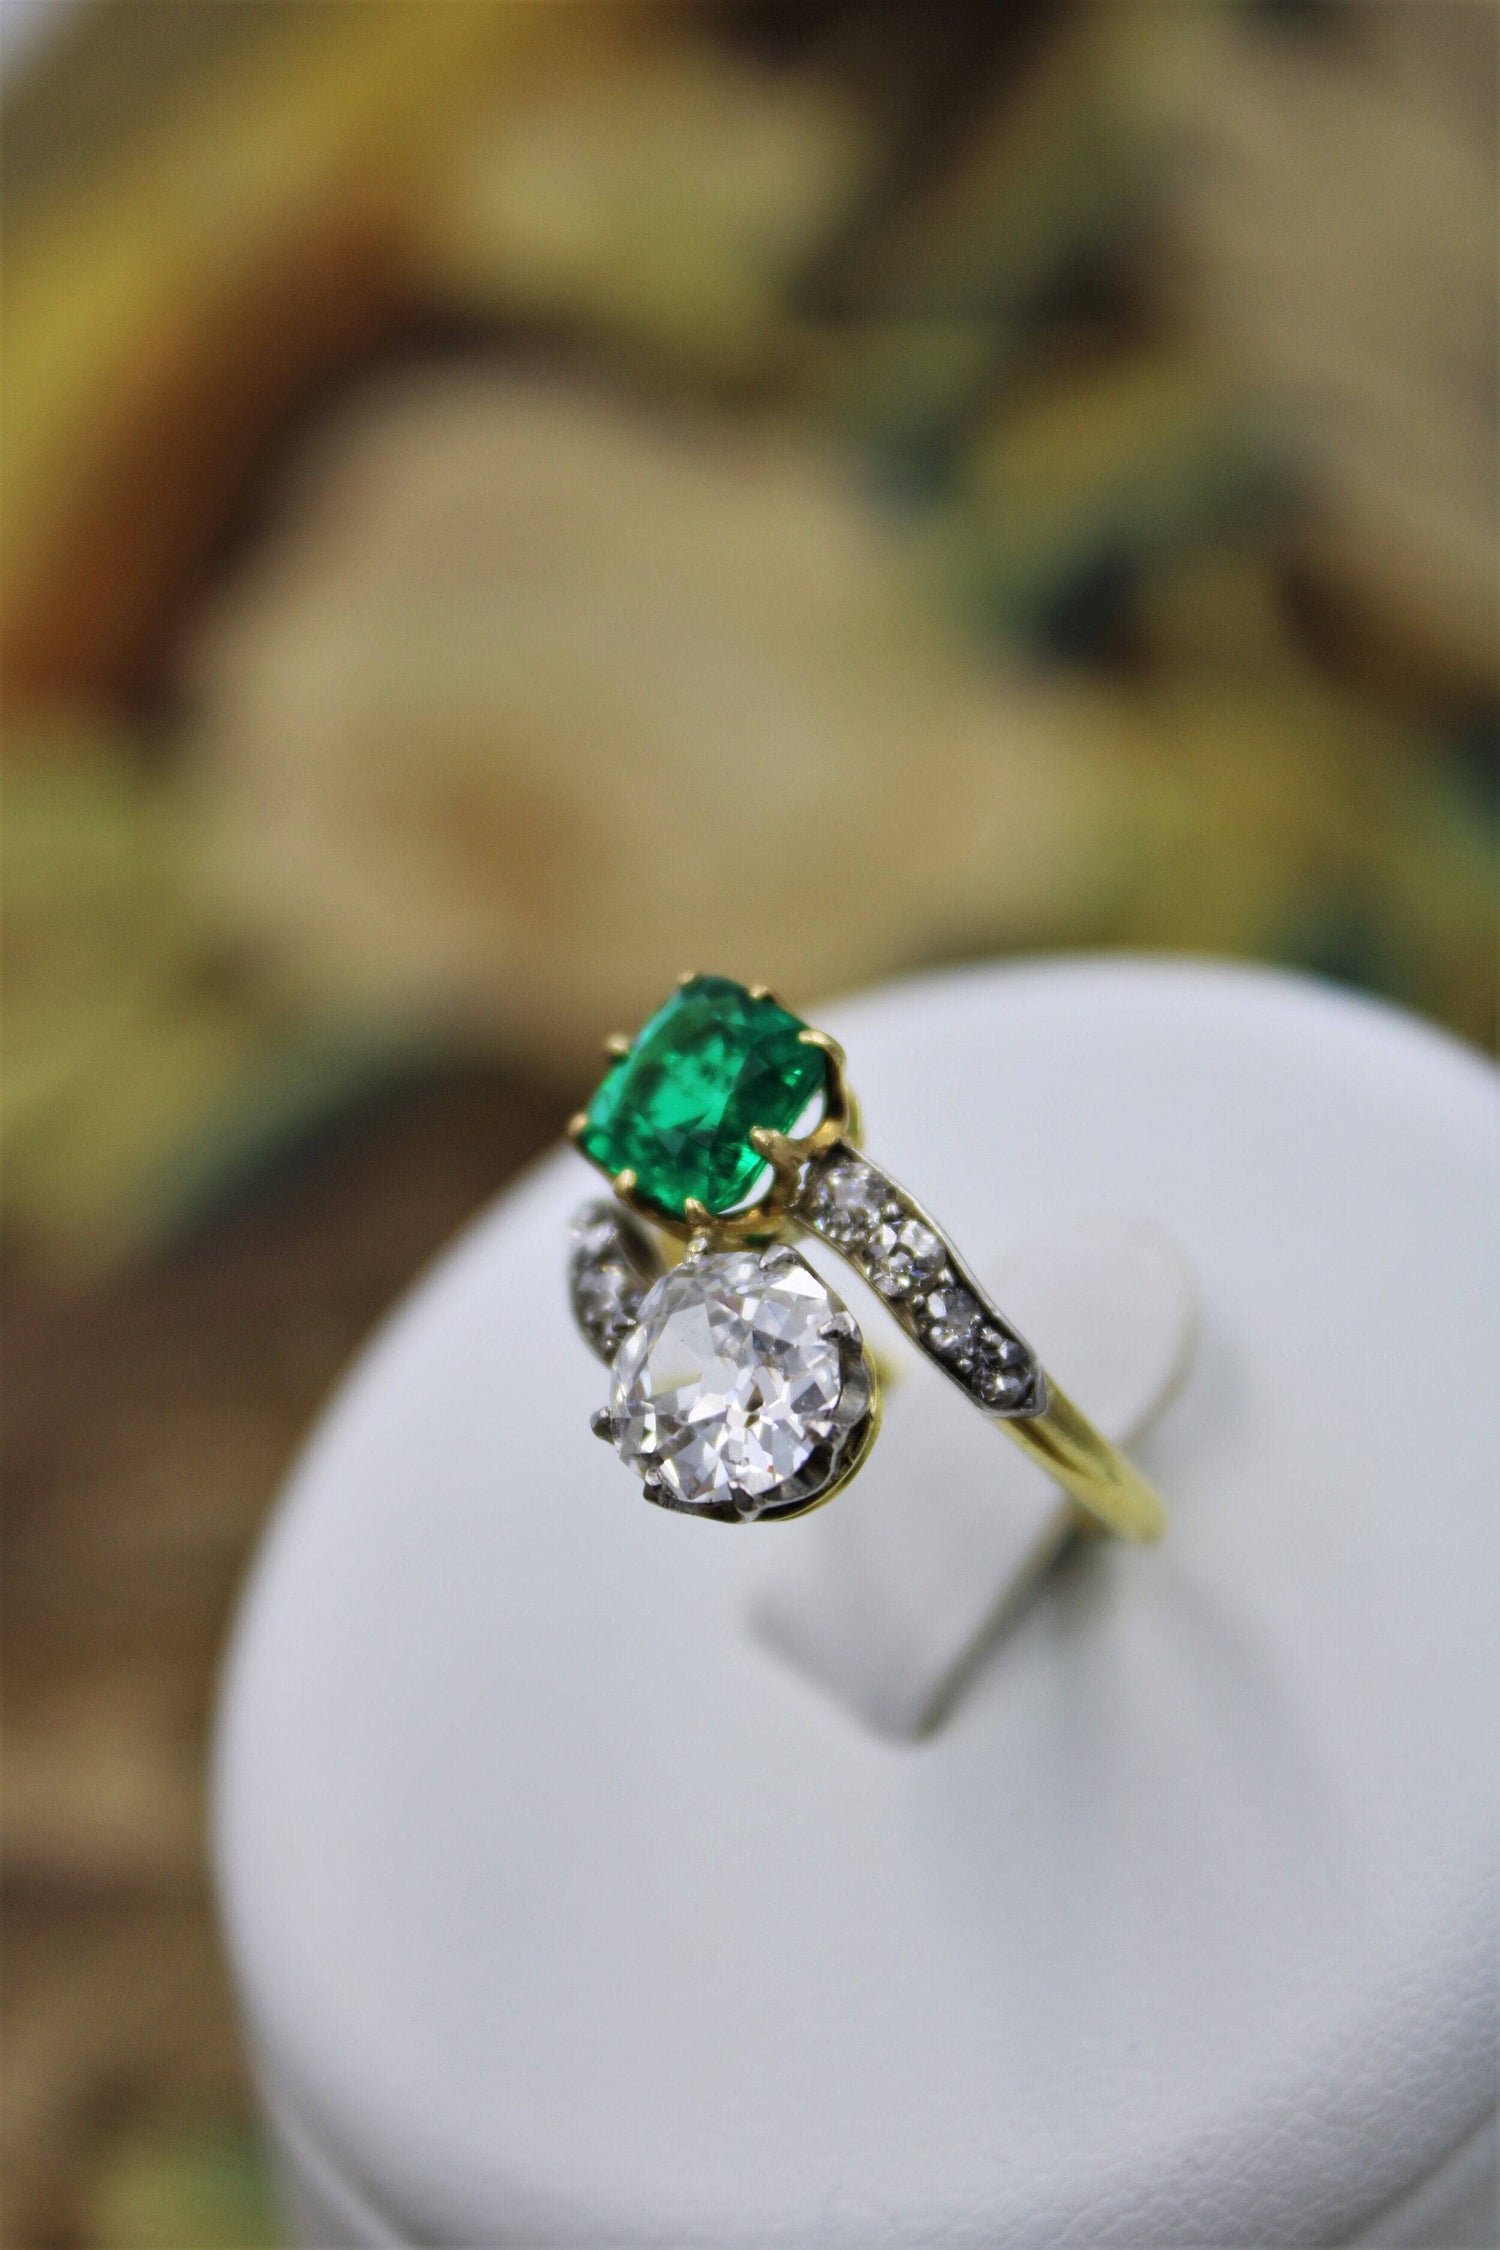 An exceptional Colombian Emerald & Diamond Ring mounted in 18ct Yellow Gold & Platinum, English, Circa 1910 - Robin Haydock Antiques